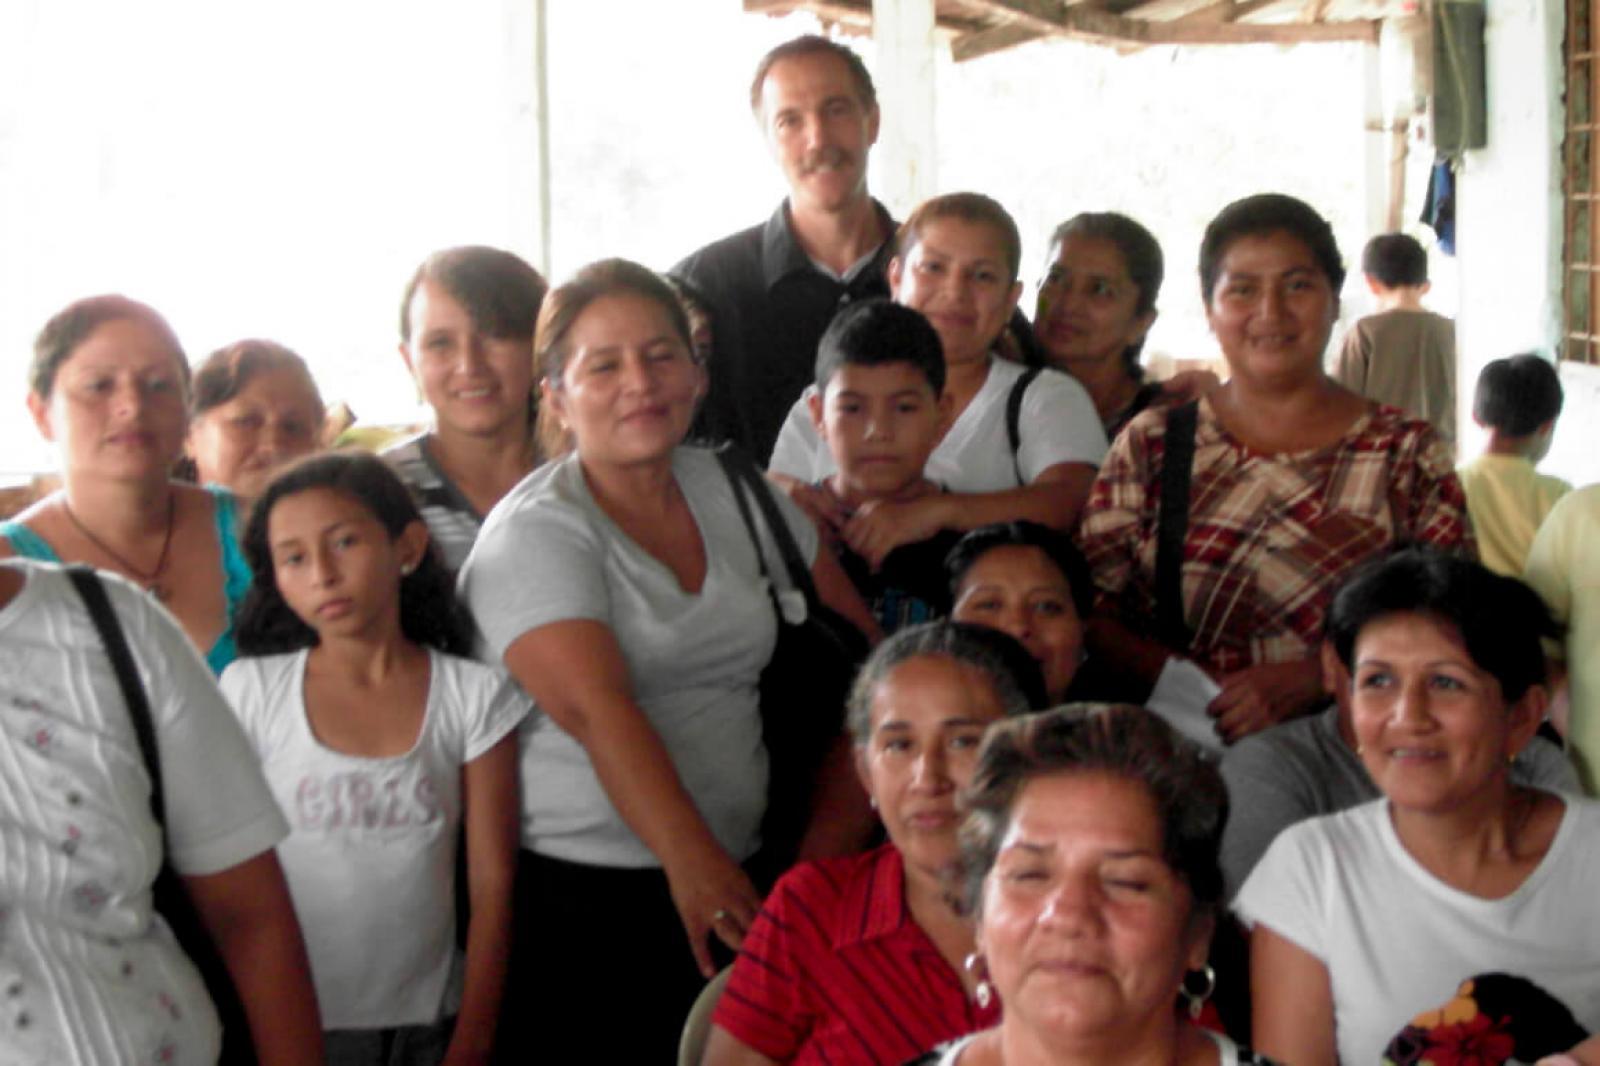 Vince Vetro with some of the women he is helping achieve business success in Ecuador.